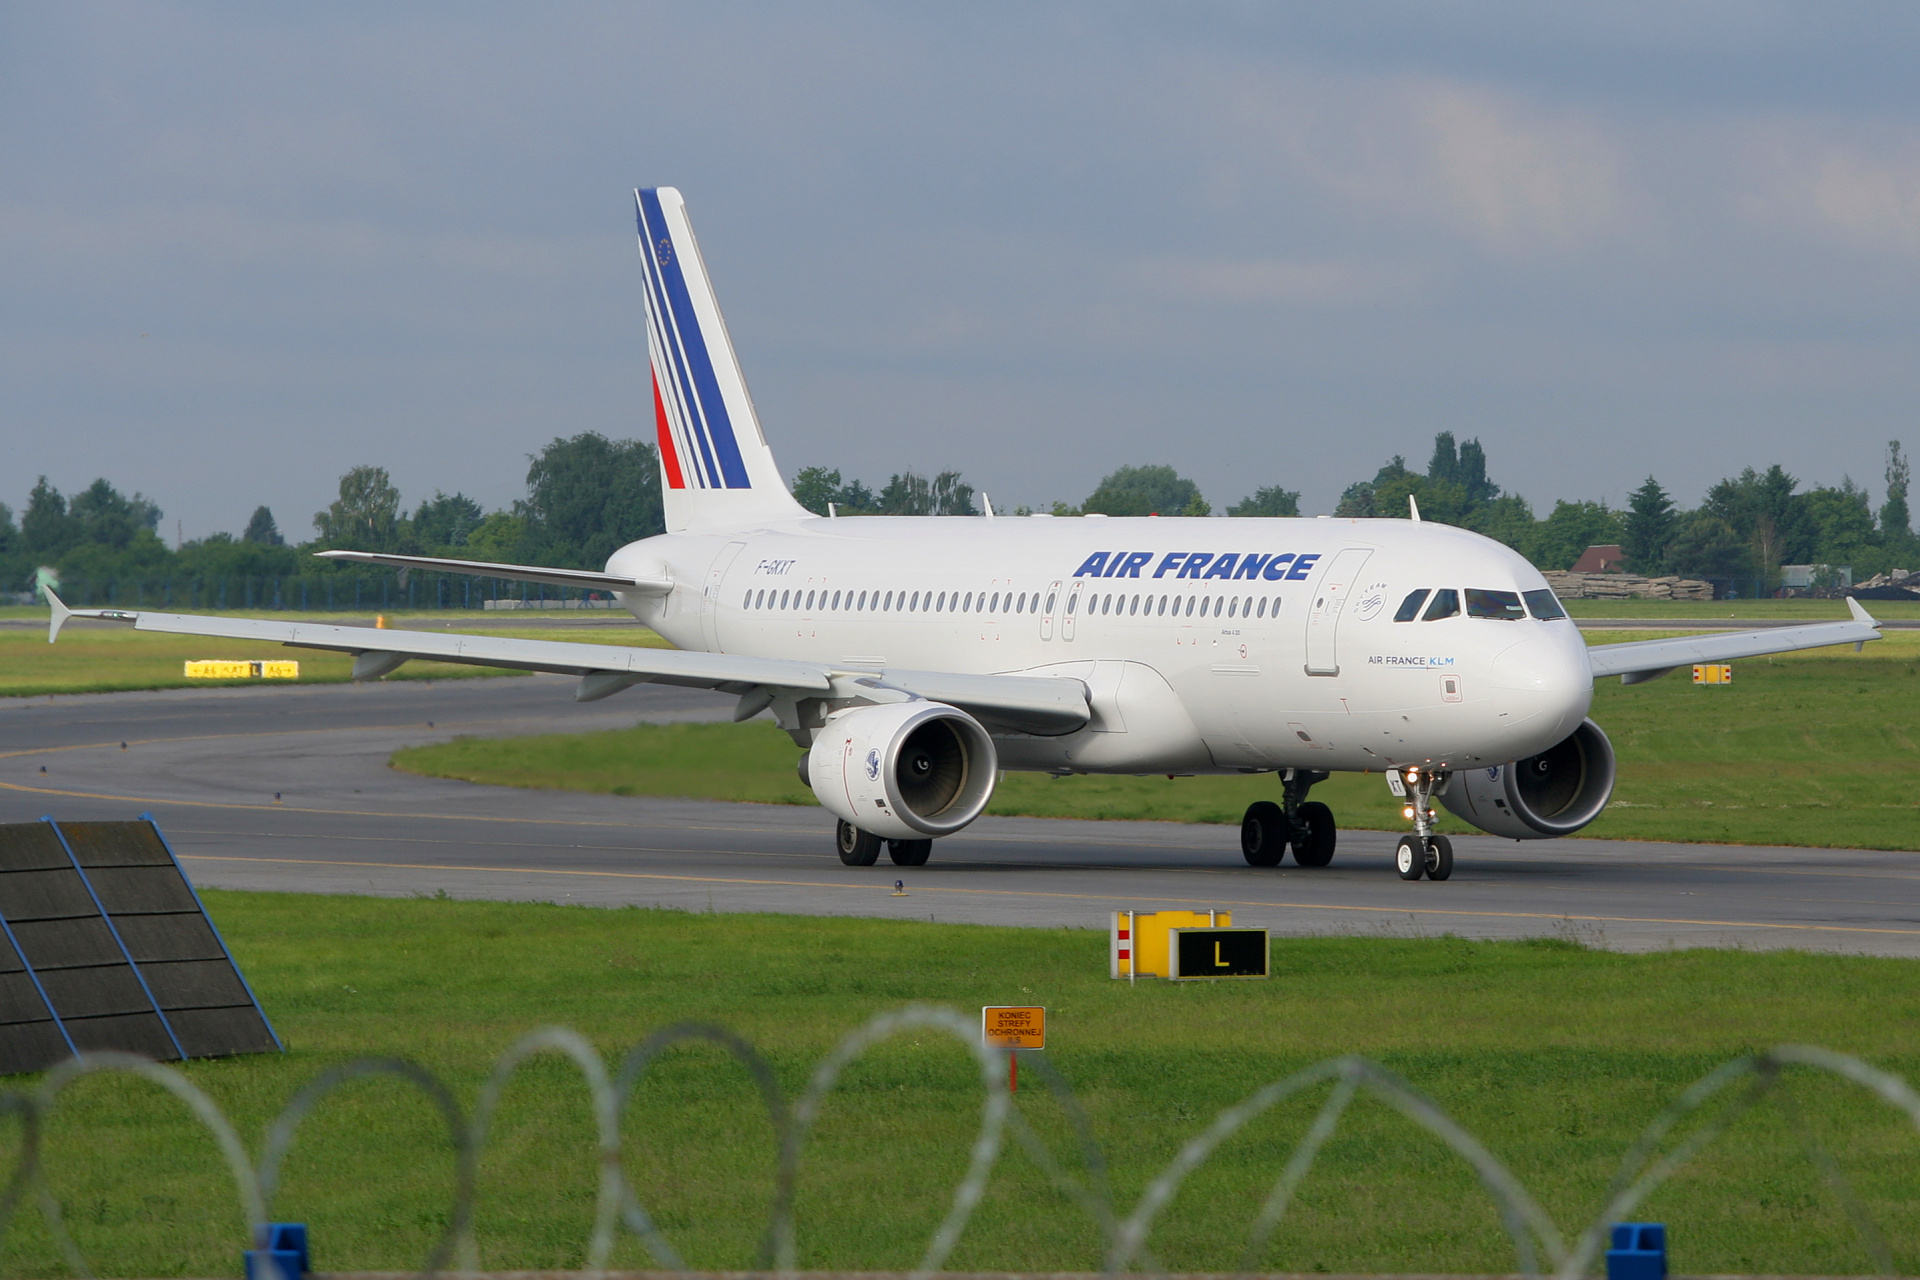 F-GKXT (Aircraft » EPWA Spotting » Airbus A320-200 » Air France)